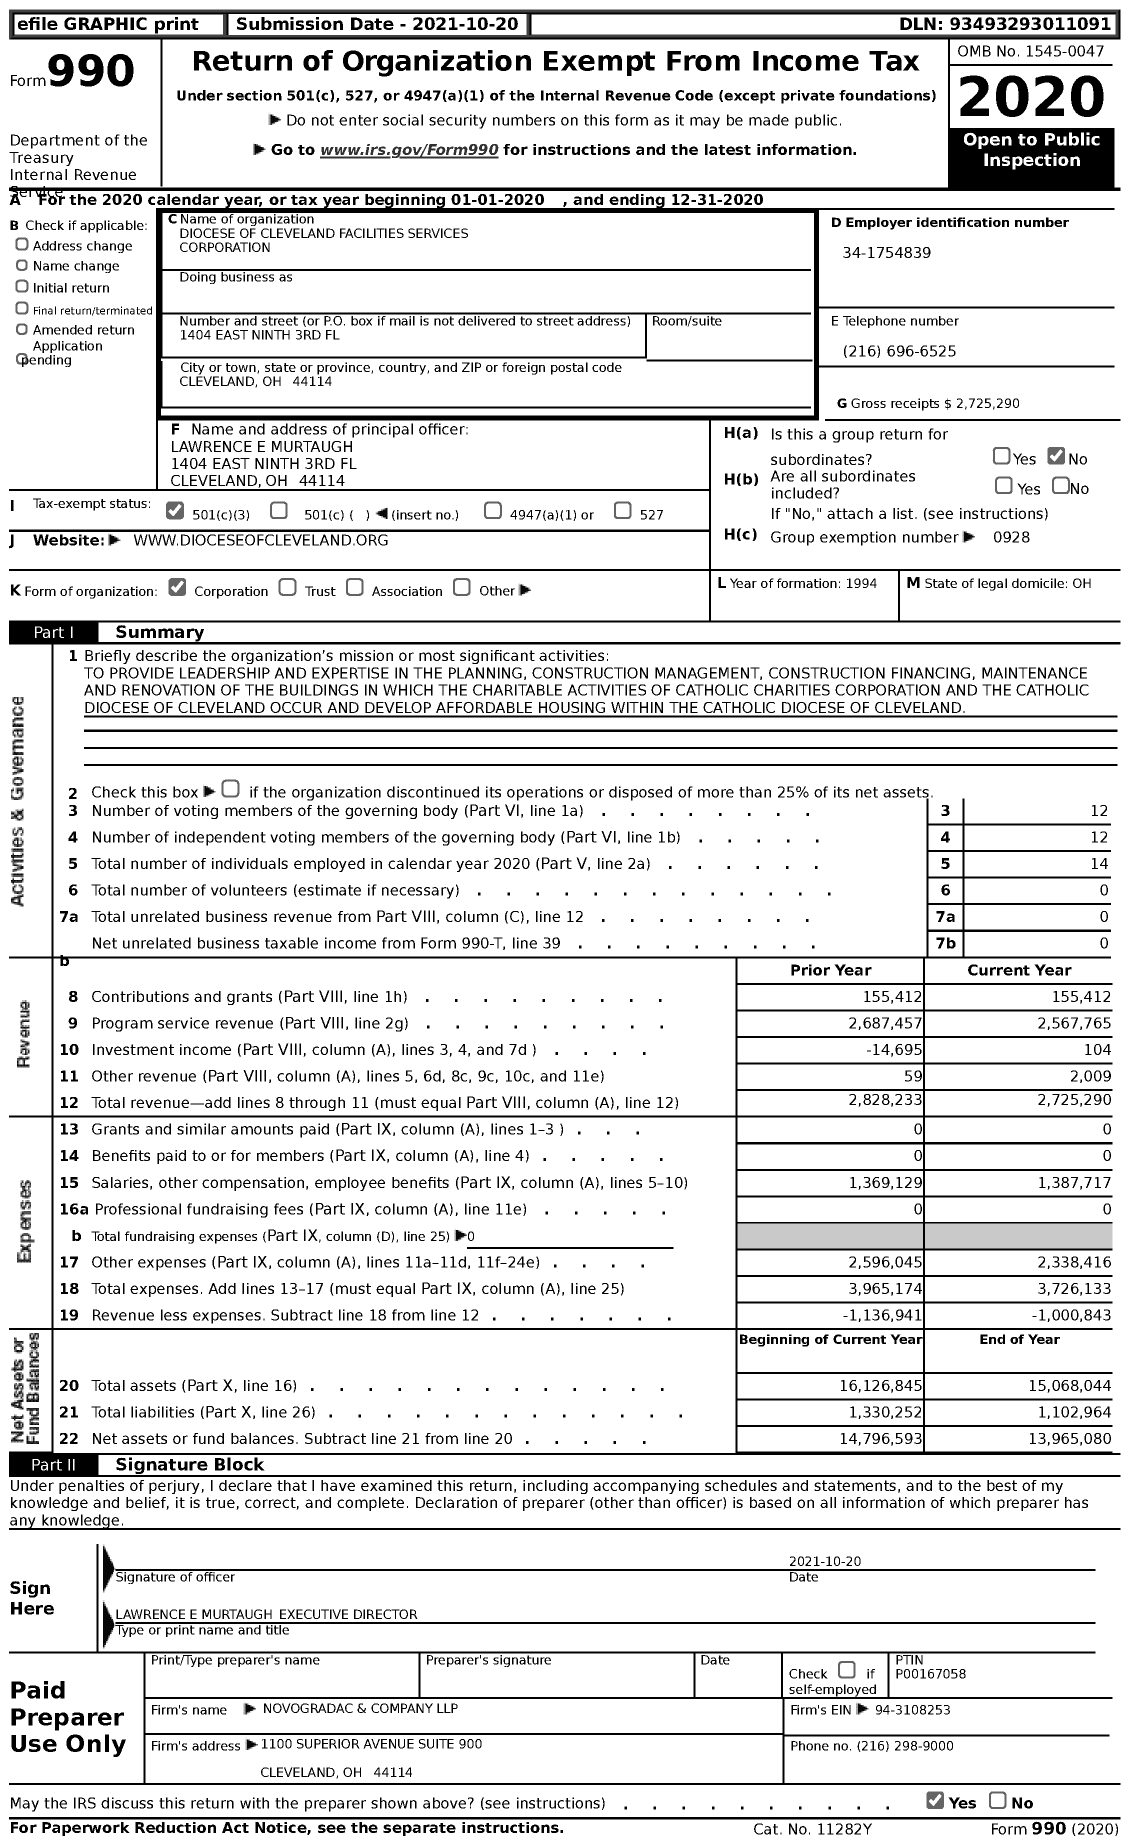 Image of first page of 2020 Form 990 for Diocese of Cleveland Facilities Services Corporation